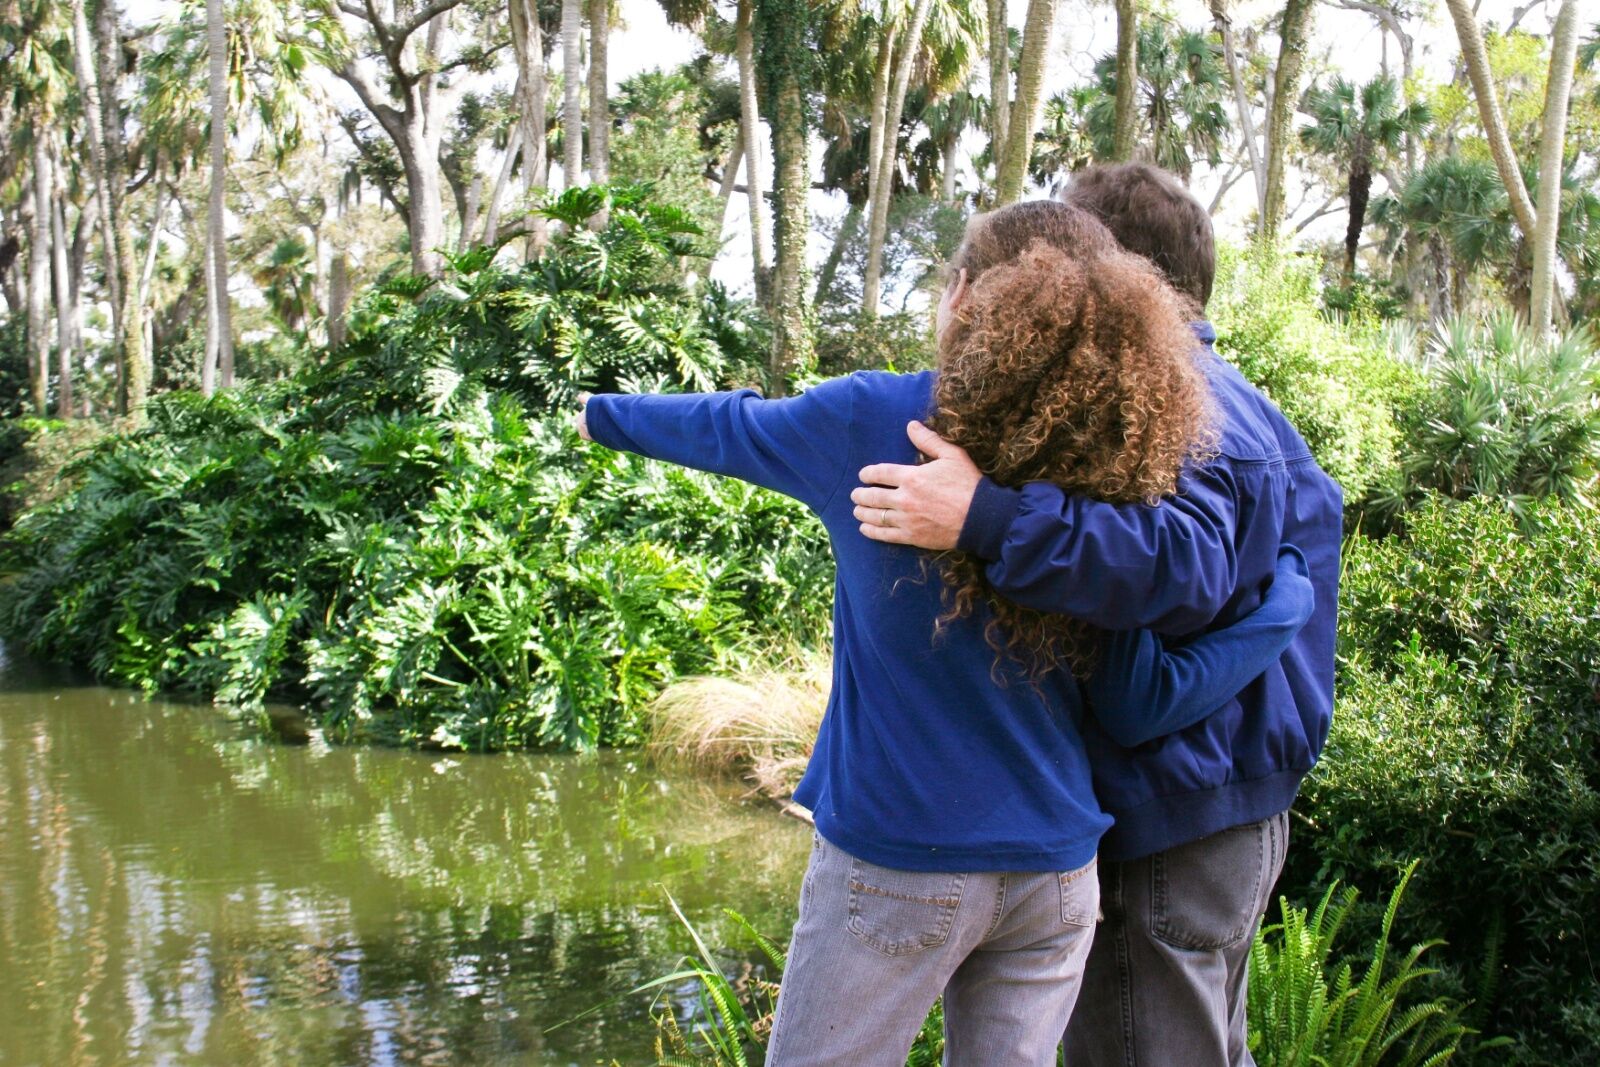 father and daughter in a swamp in florida